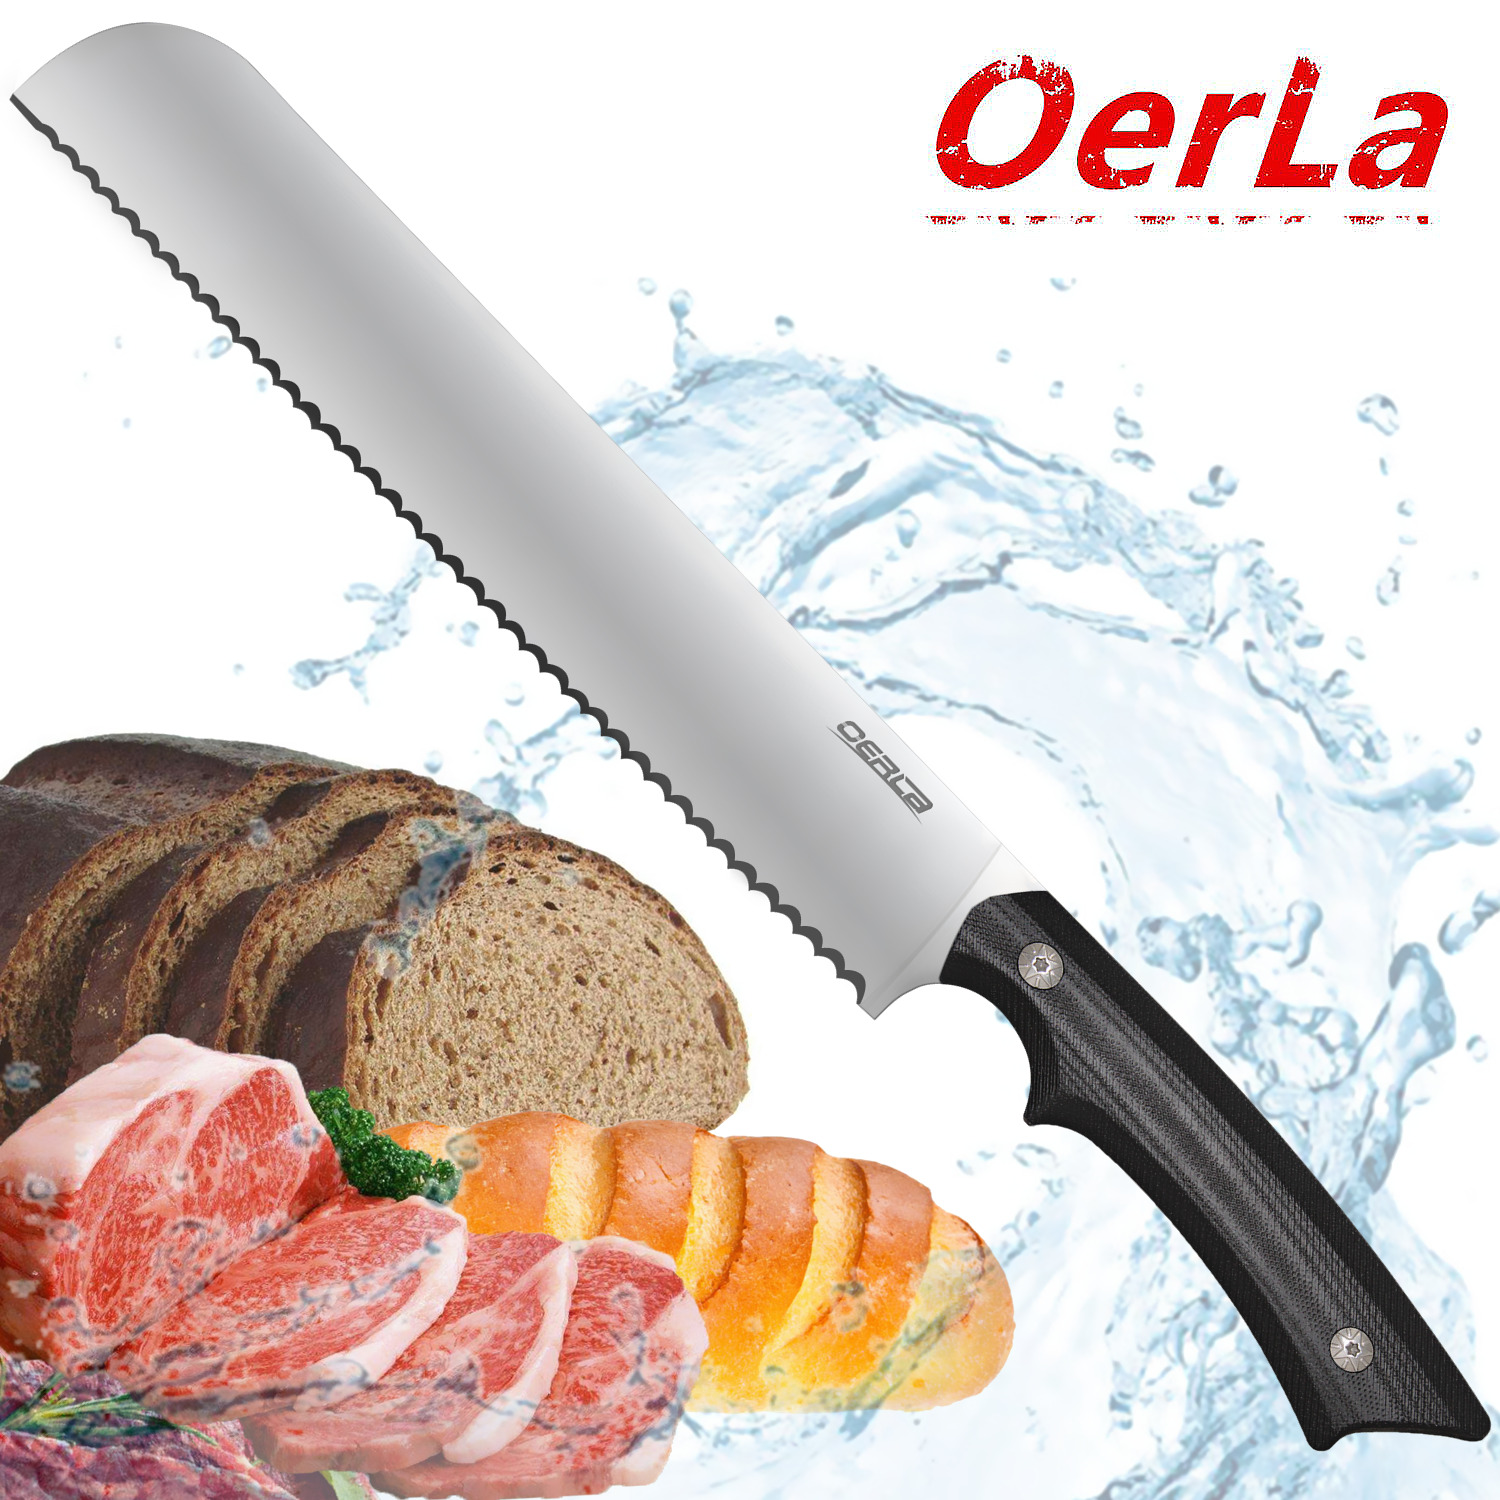 OERLA 10 Inch Forged Cutlery 420HC Full Tang Steel Bread Knife with G10 Handle